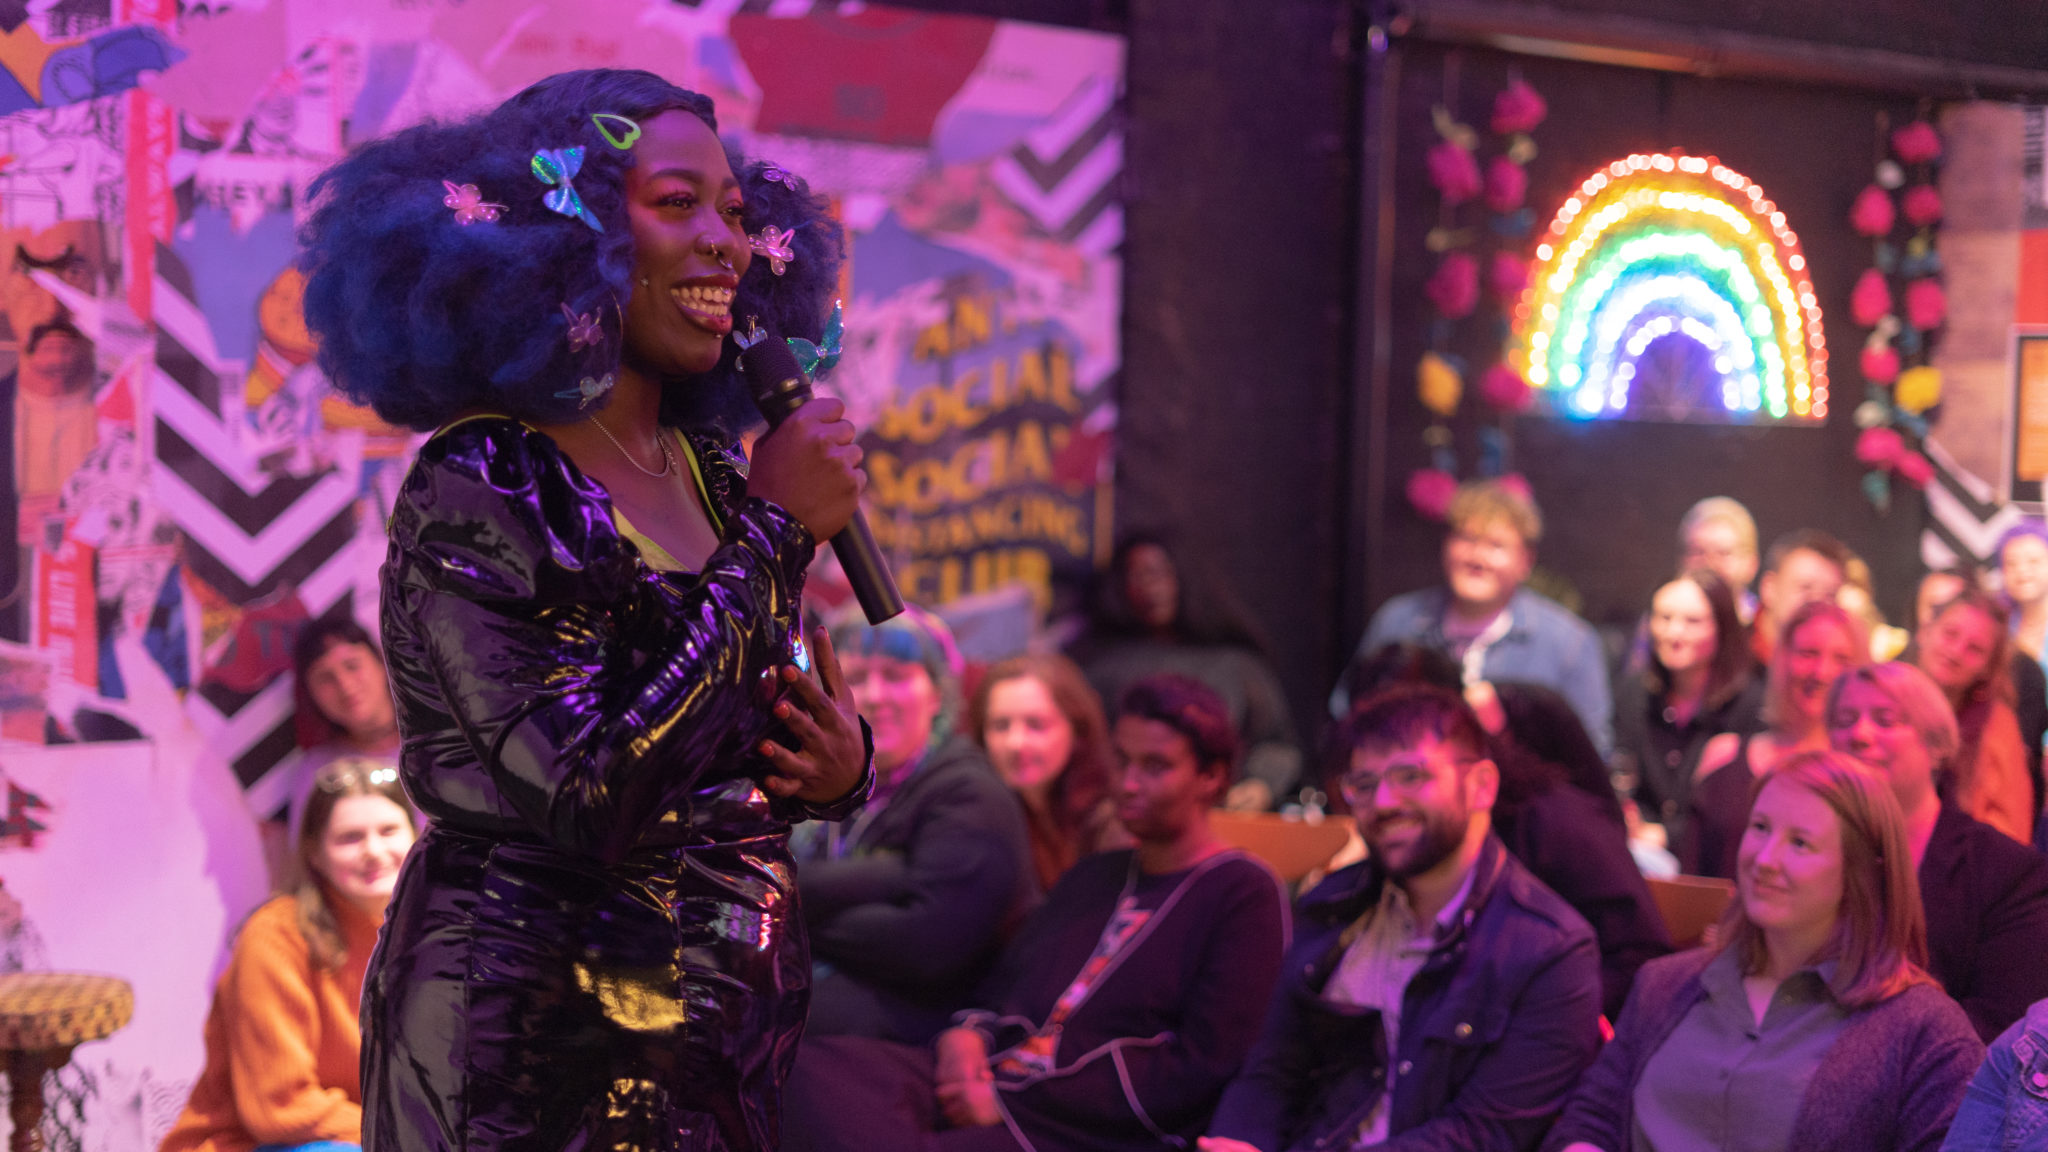 A black femme presenting person with blue Afro hair wears a black PVC mini dress and smiles on a mix in front of a crowd of people. She is lit by purple lighting.